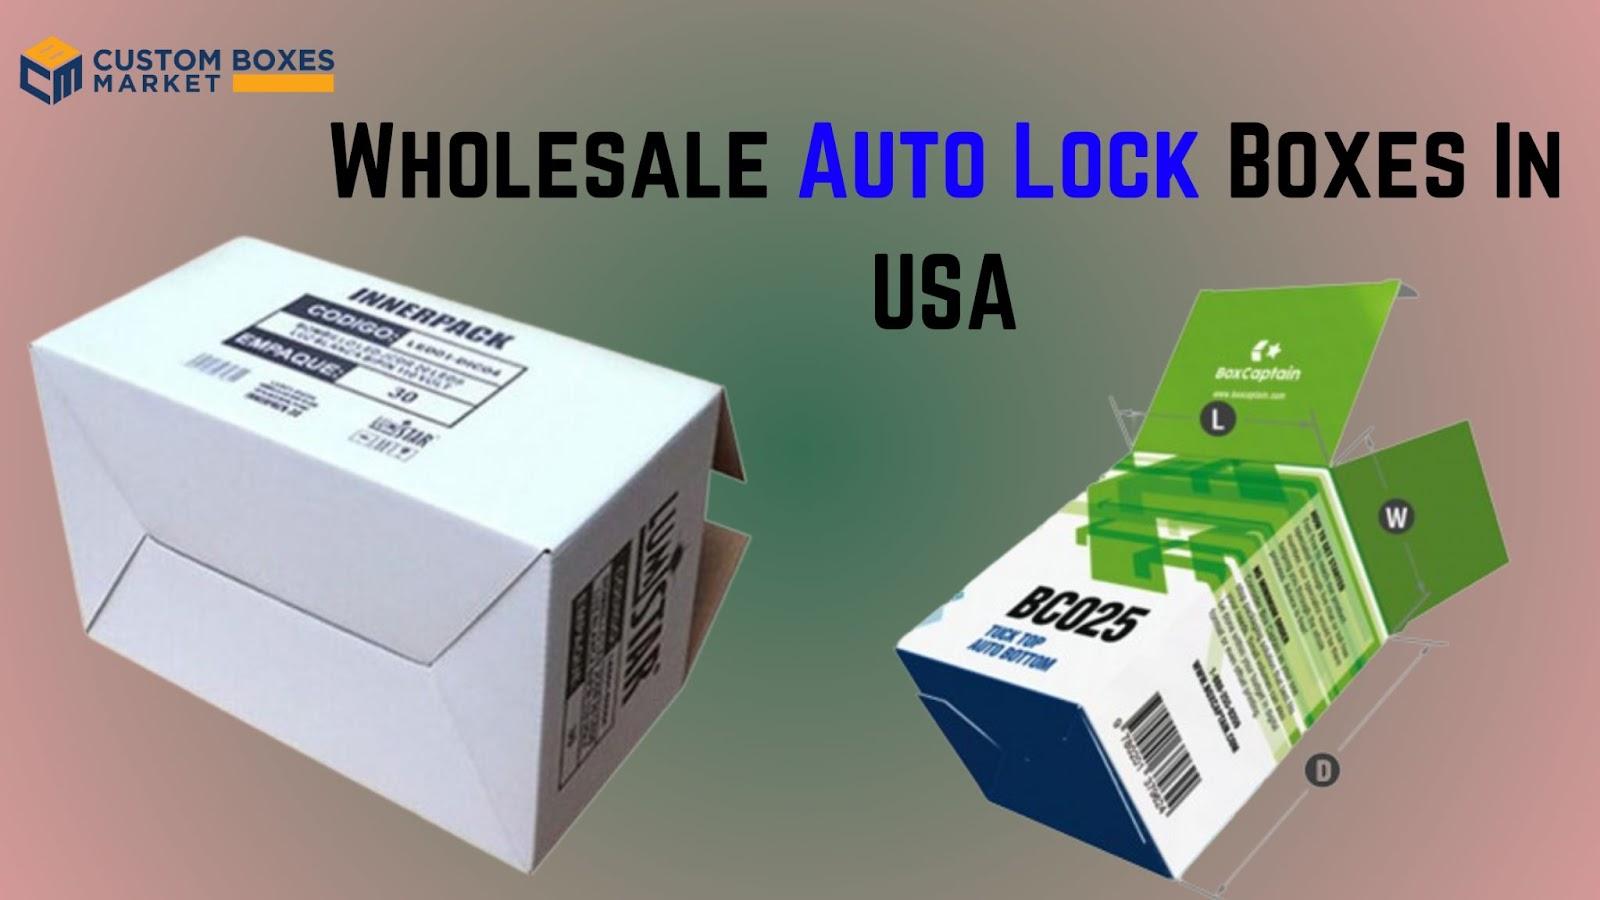 A Best Custom Auto Lock Boxes Packaging Solutions